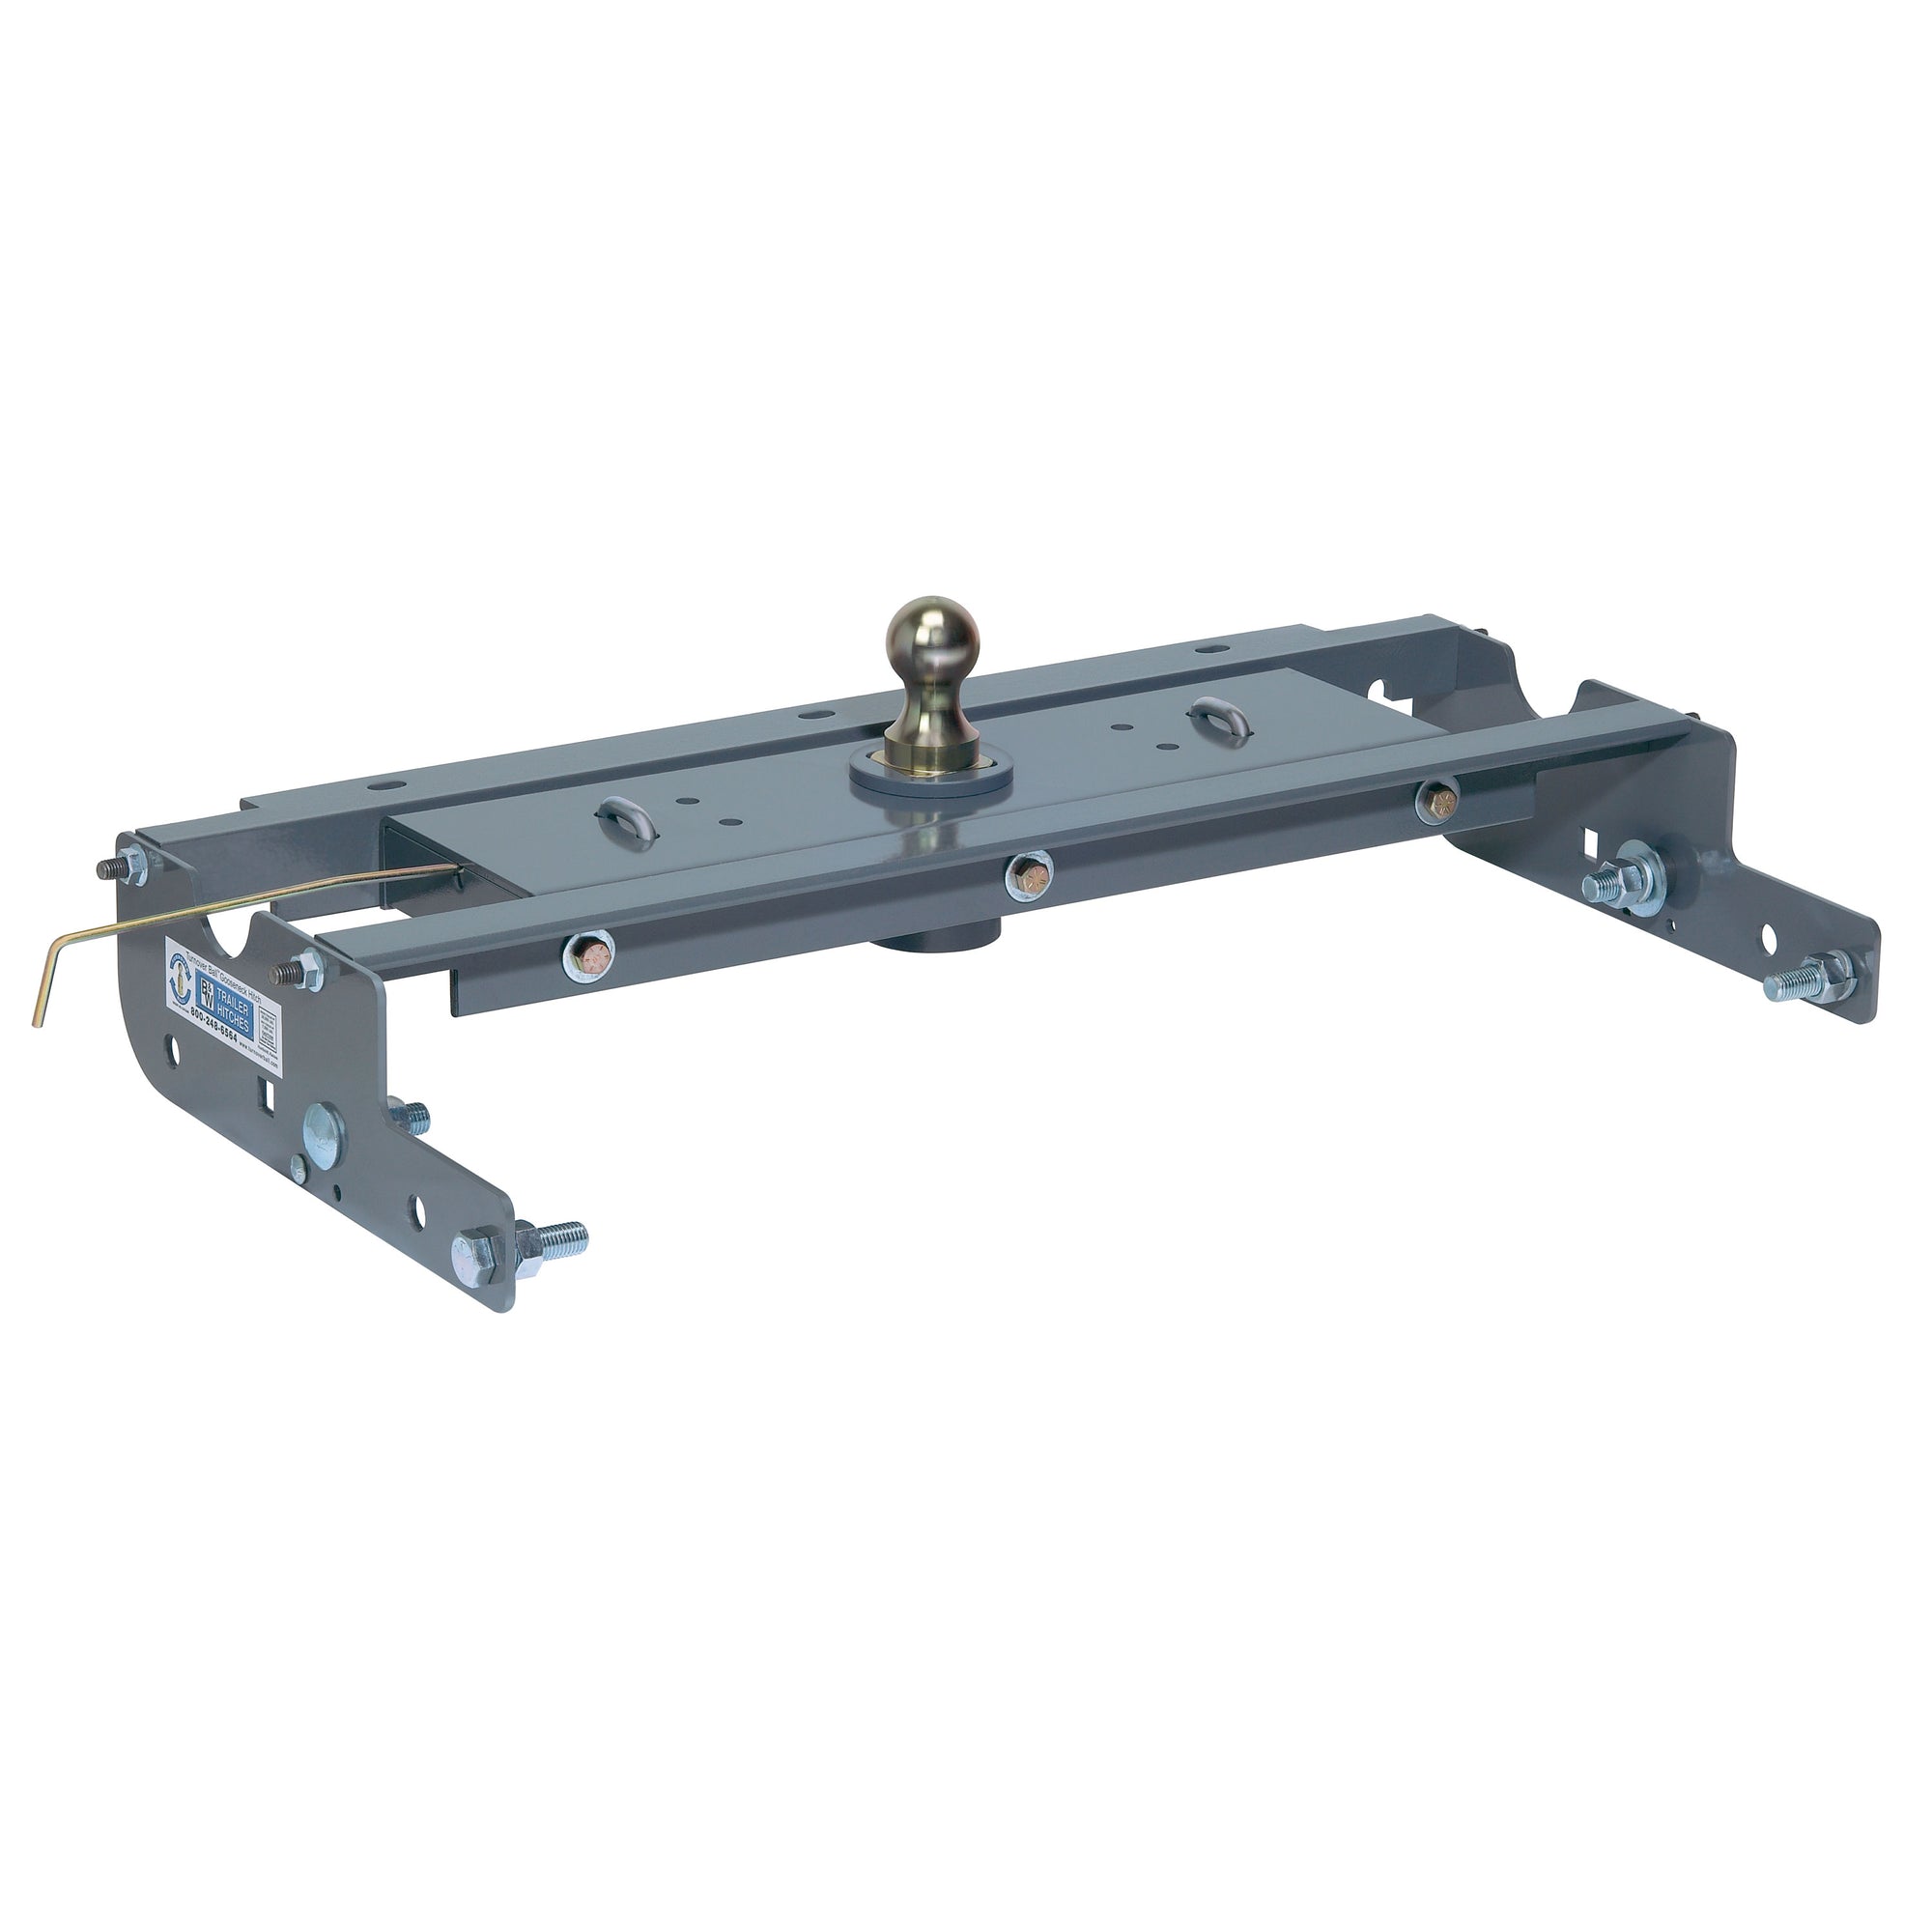 B&W Trailer Hitches GNRK1050 Turnoverball Gooseneck Hitch for Chevrolet/GMC 1/2, 3/4, 1-Ton Short Bed (1988-1998) & 3/4, 1-Ton Old Style Short Bed (1999-2000)